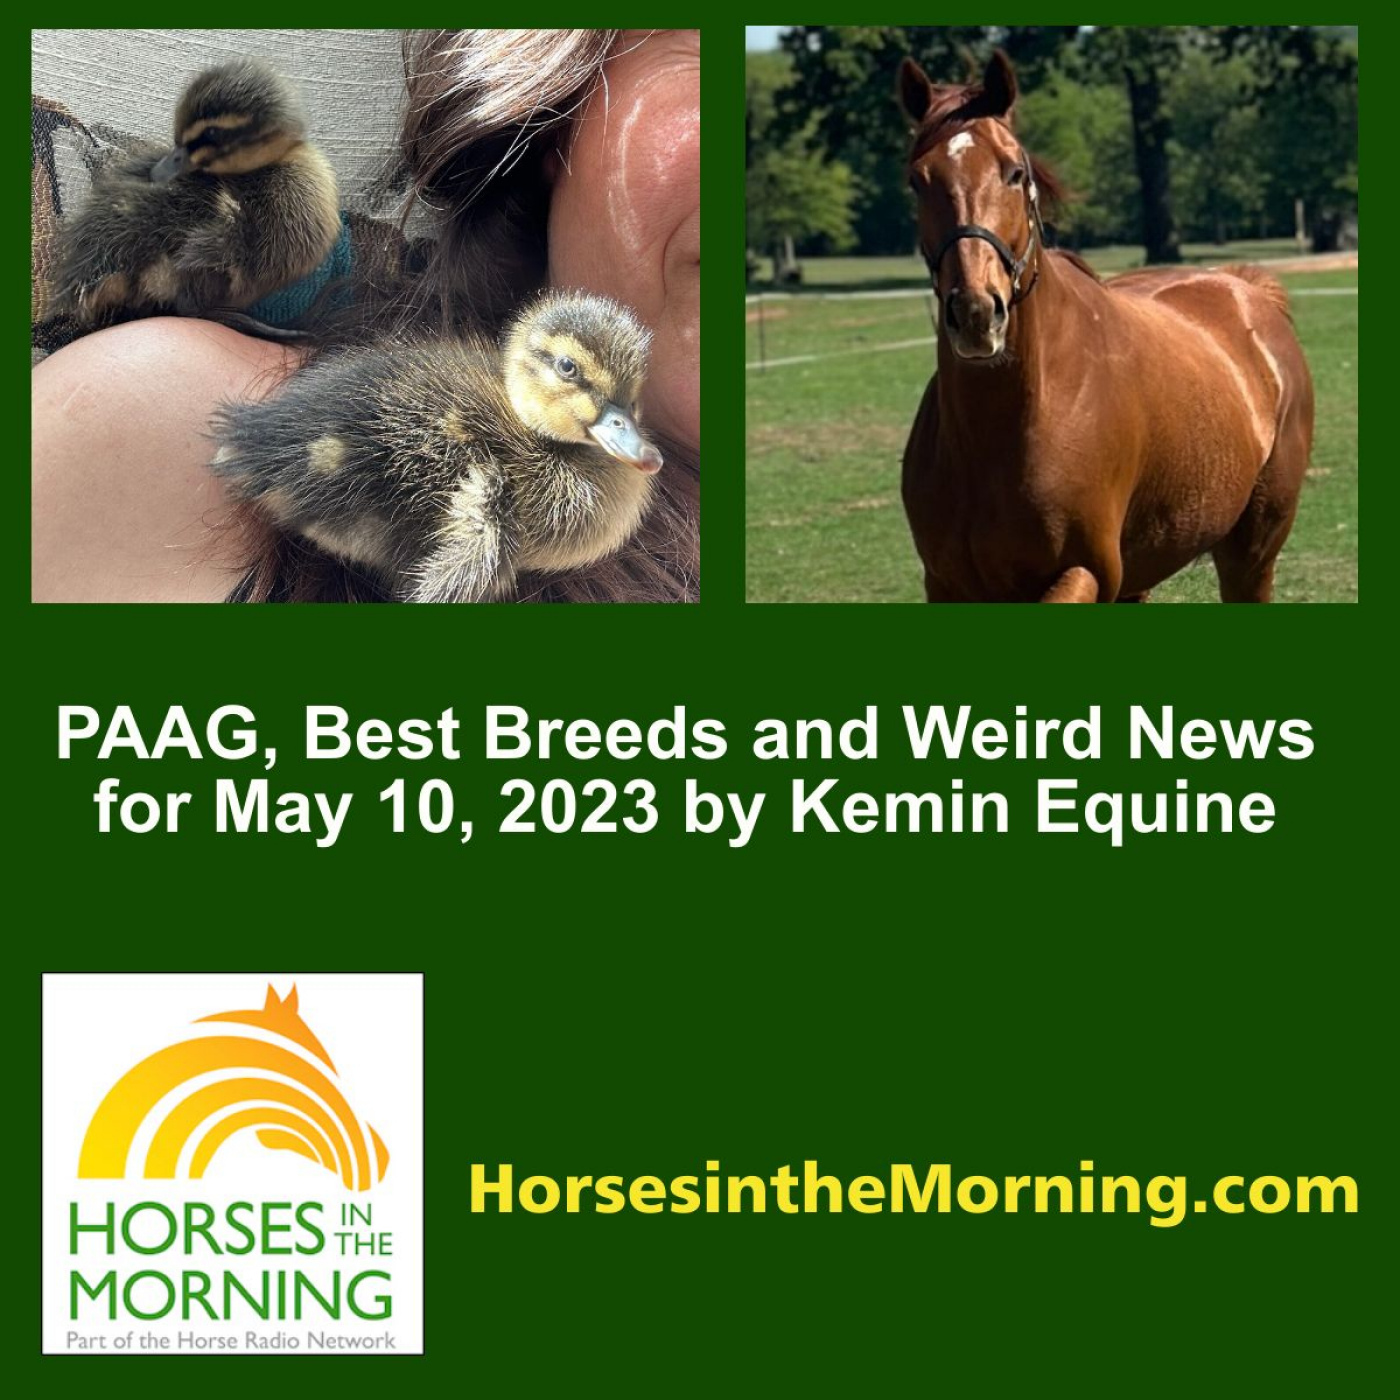 PAAG, Best Breeds and Weird News for May 10, 2023 by Kemin Equine ...